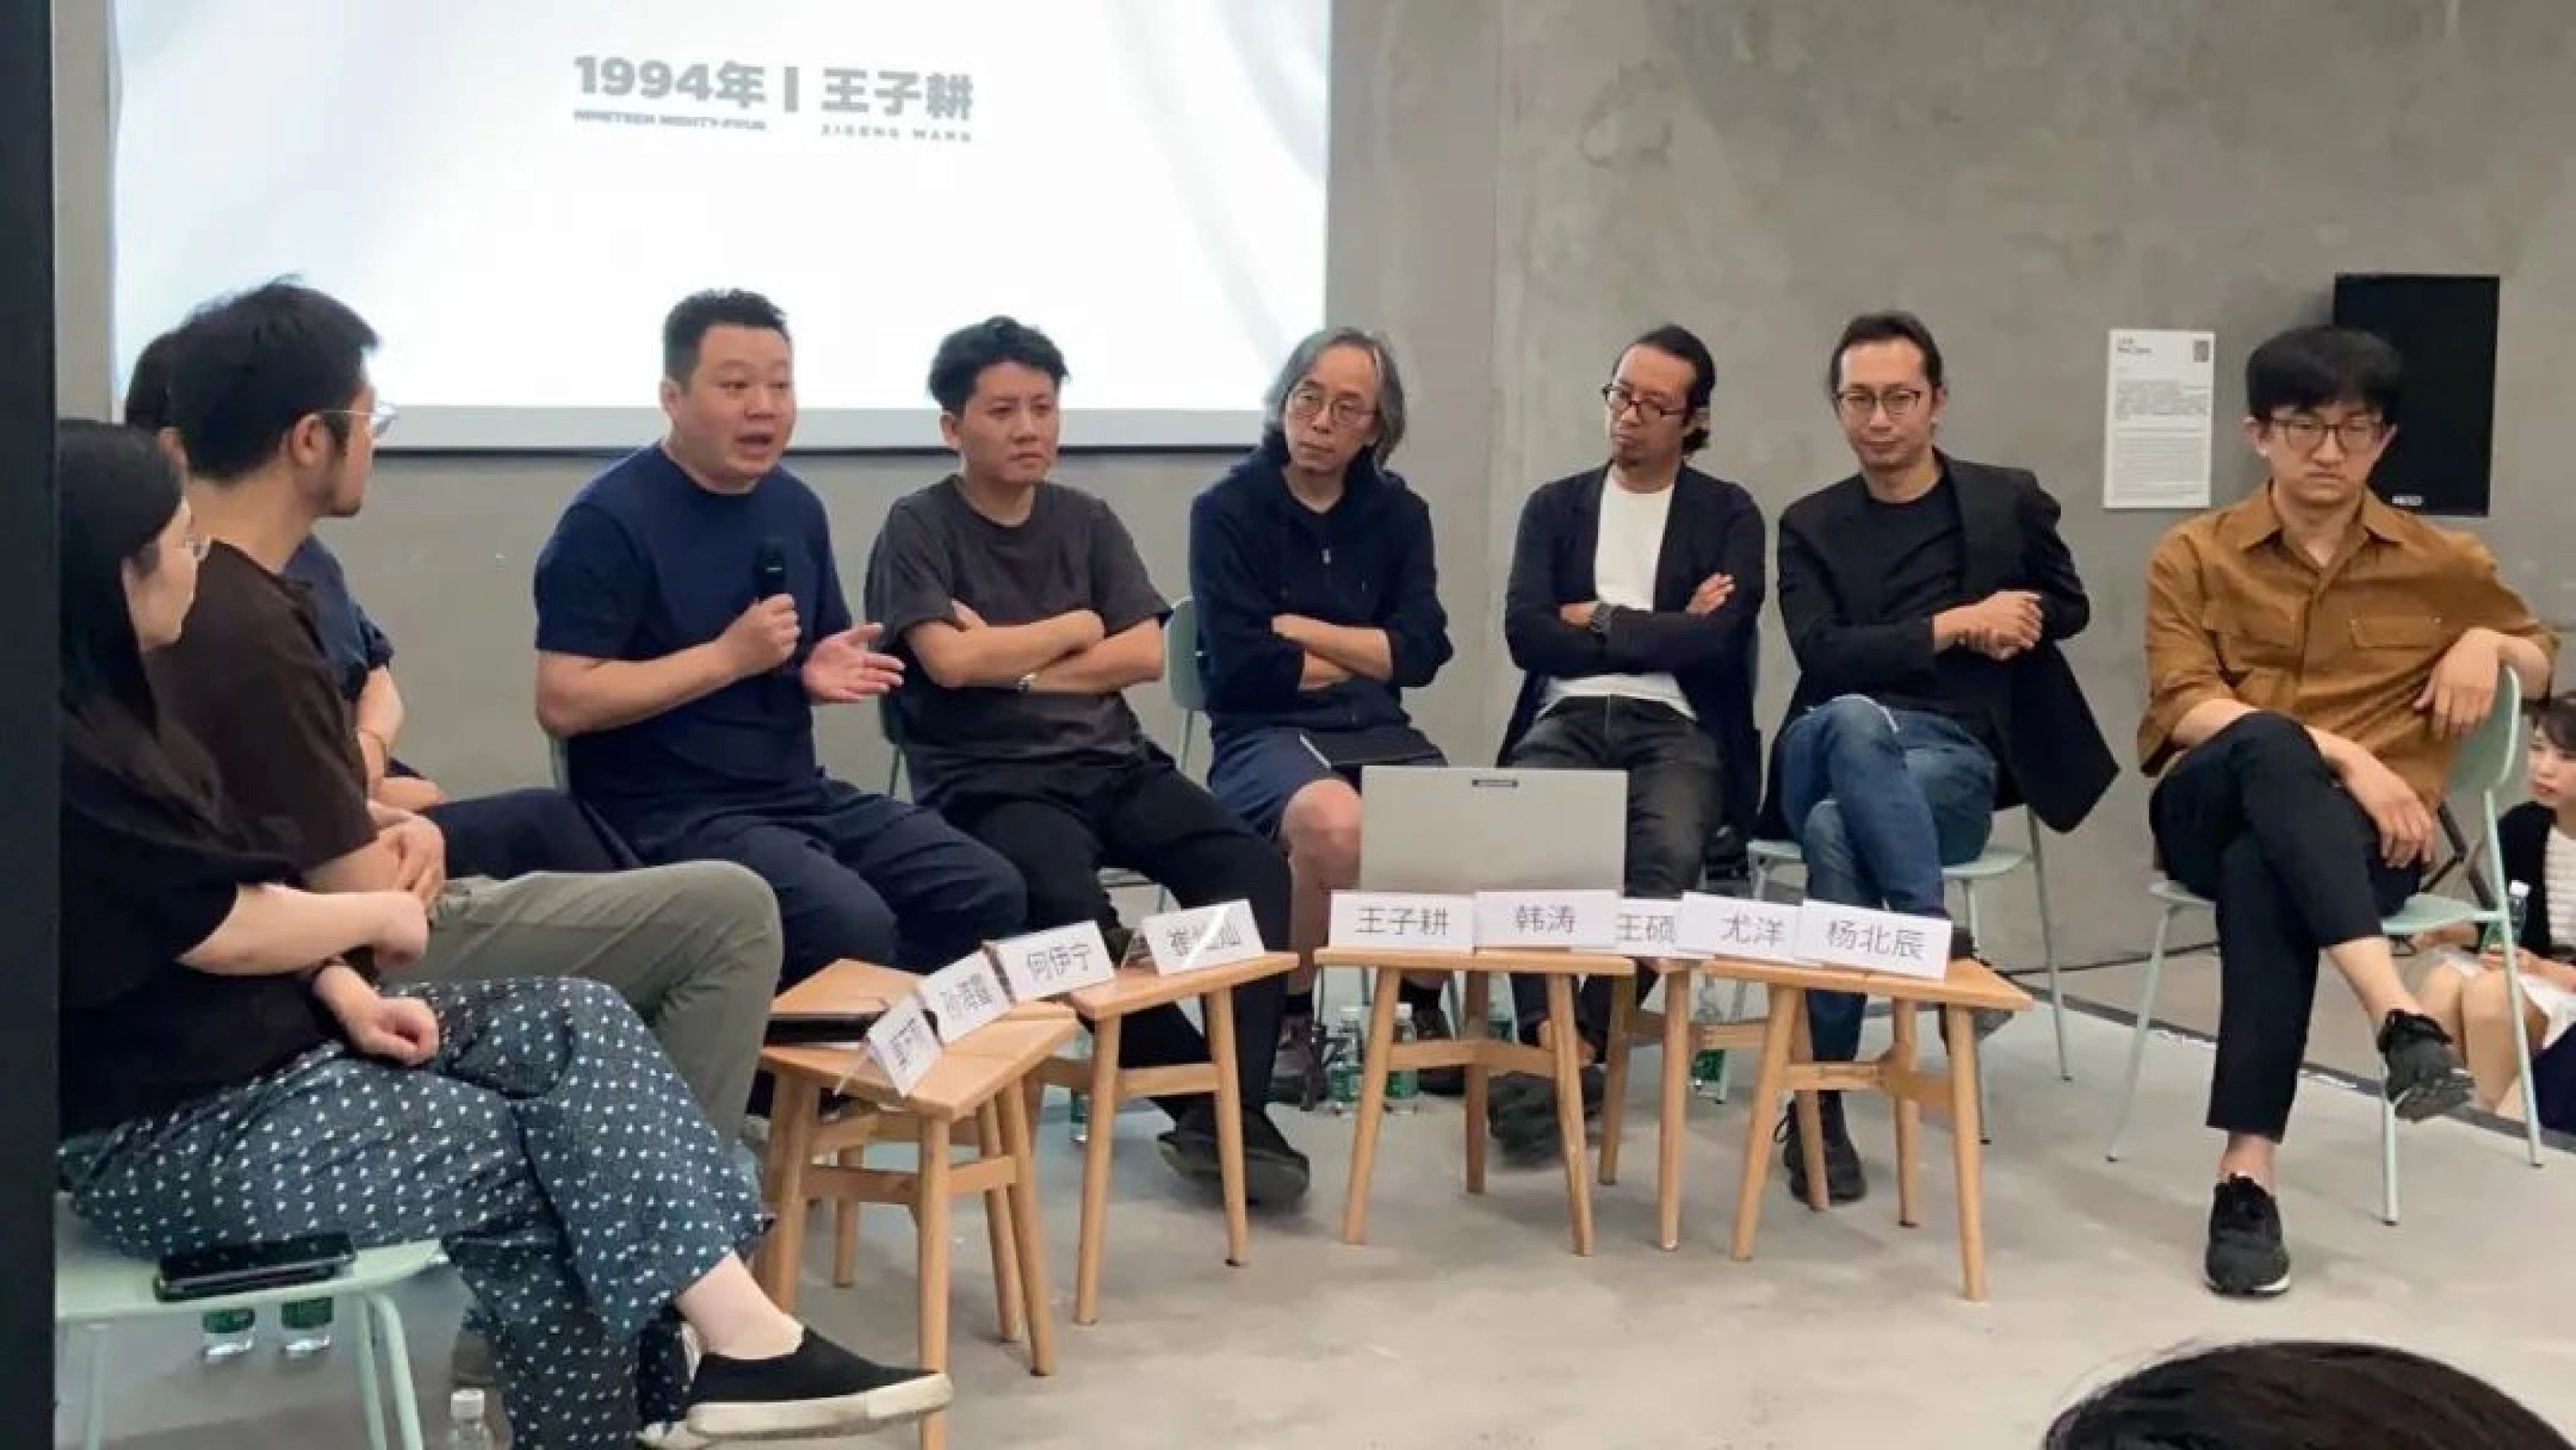 Zigeng Wang was Invited as the Keynote Speaker of the “To Be the Better One - The Methodology of the New Generation" Series Forum at the Wind H Art Center